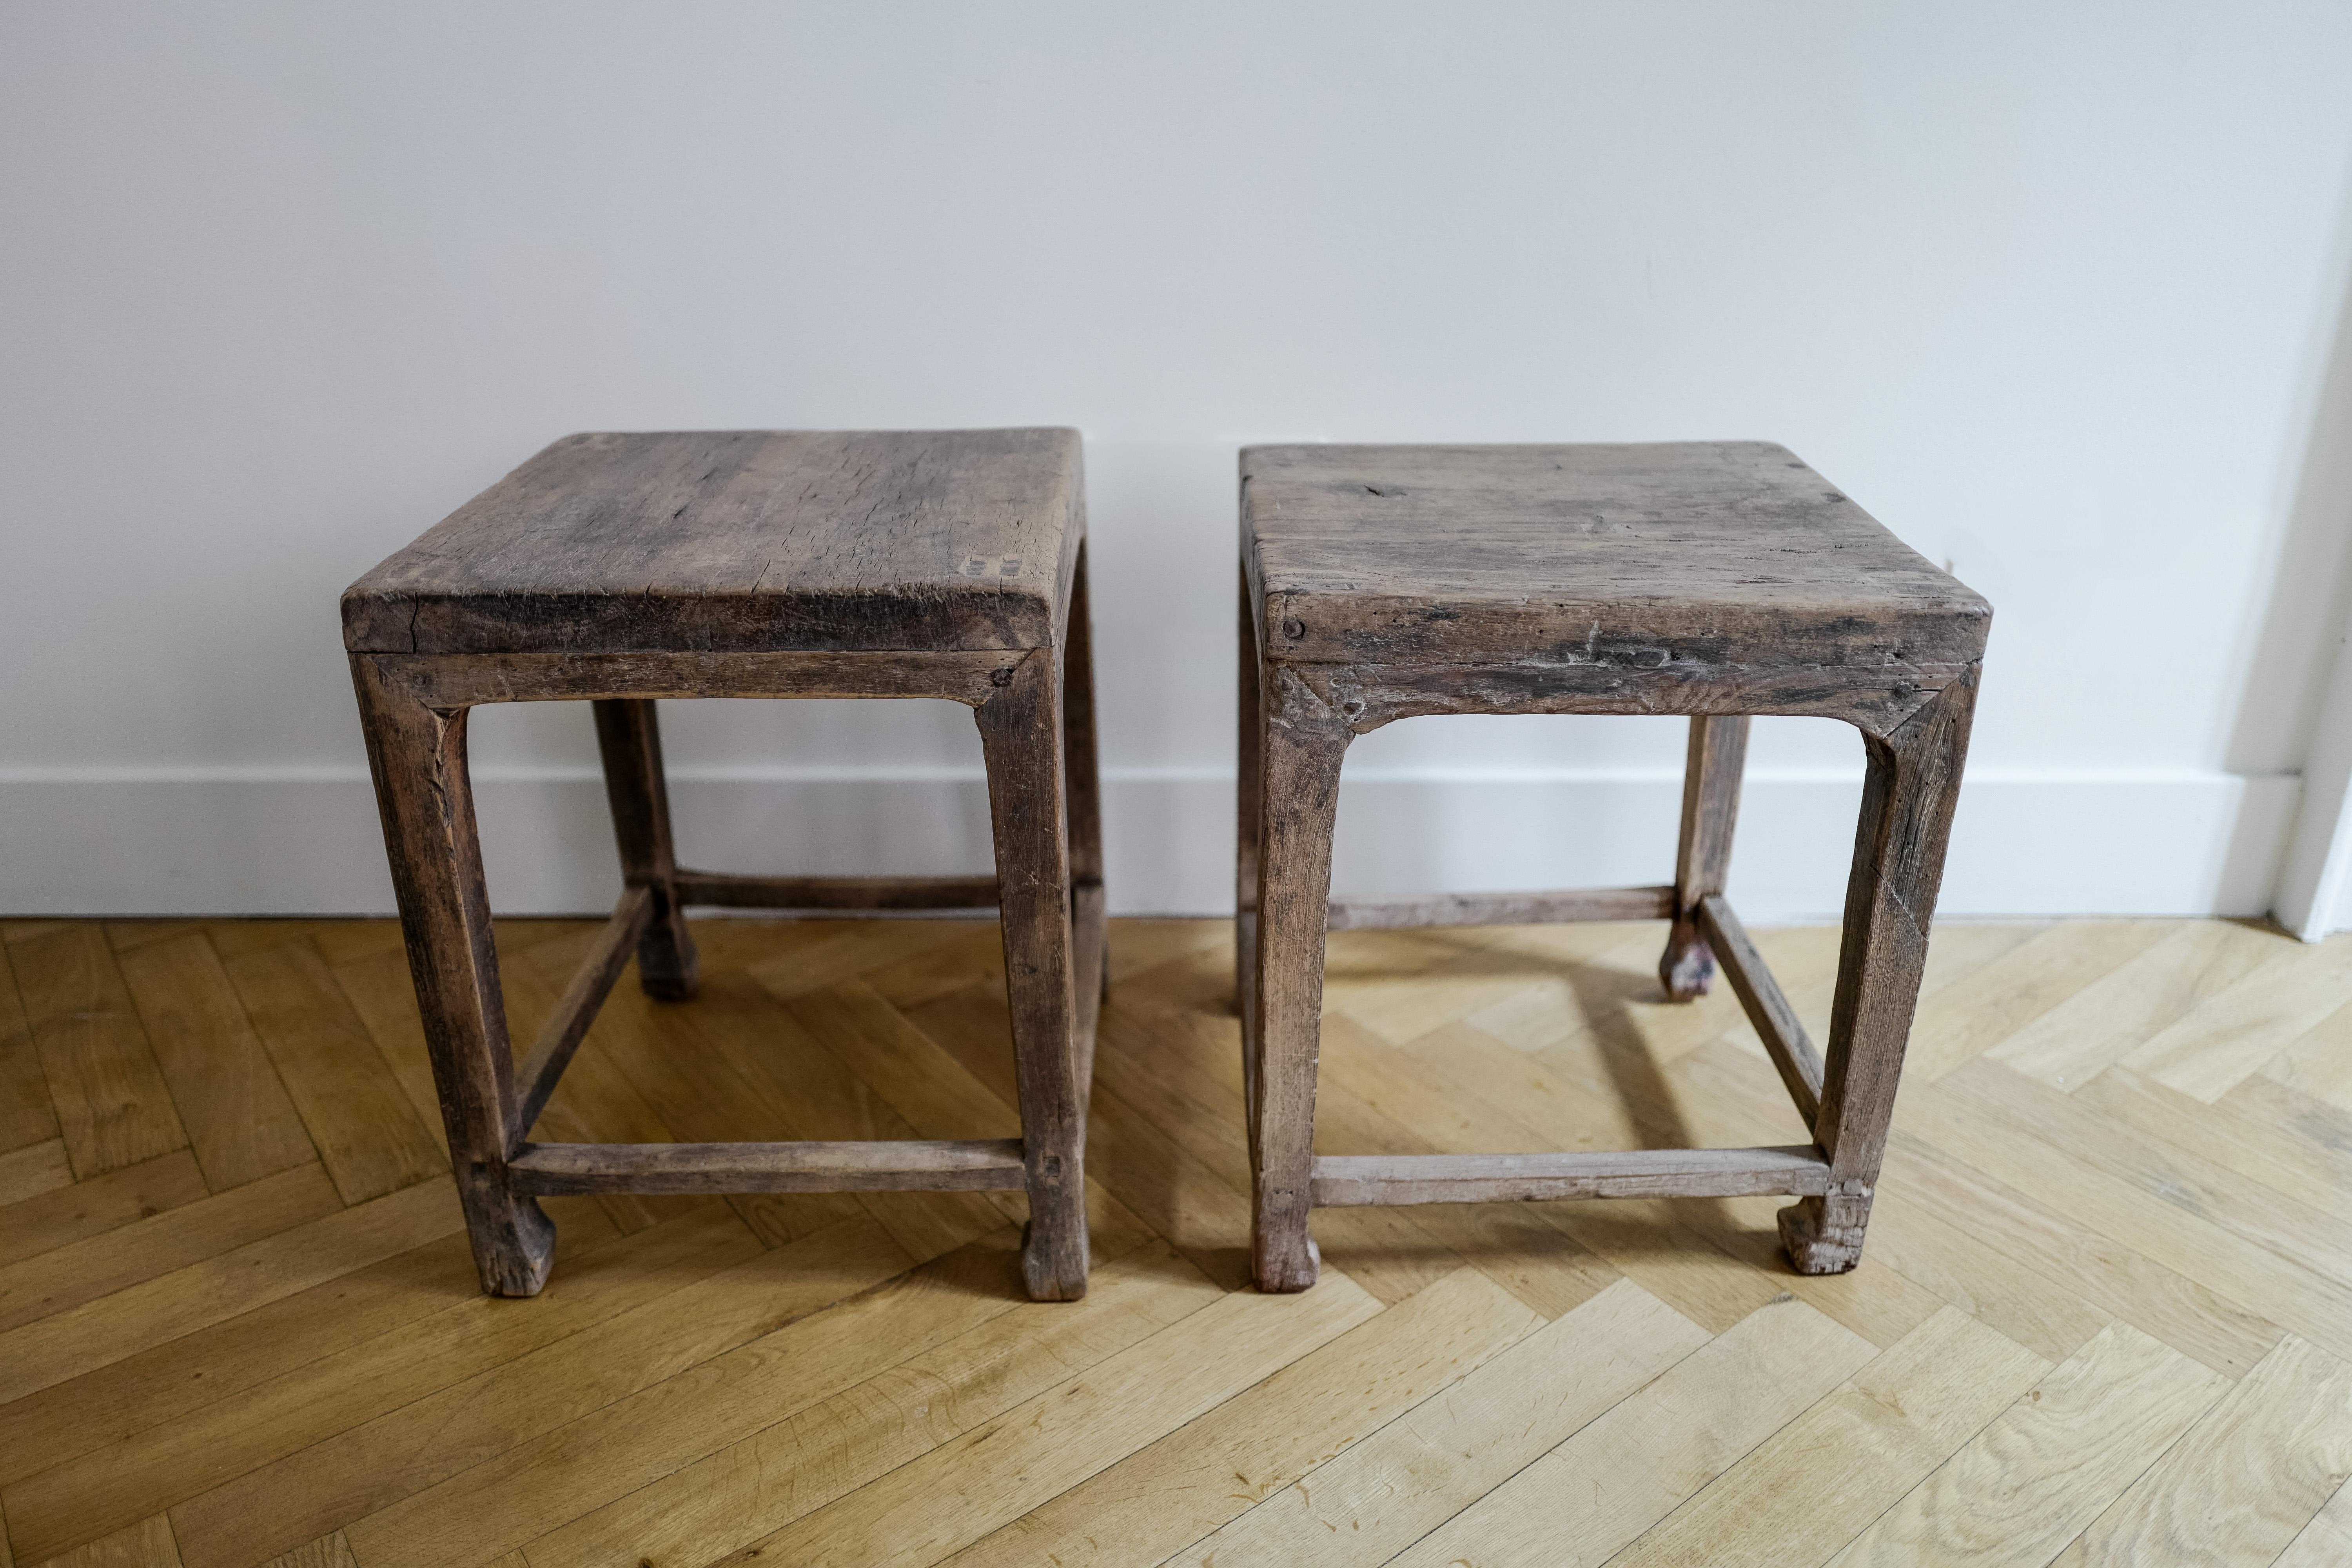 A pair of handcrafted square elm wood side tables or stools made in China, circa early 20th century.